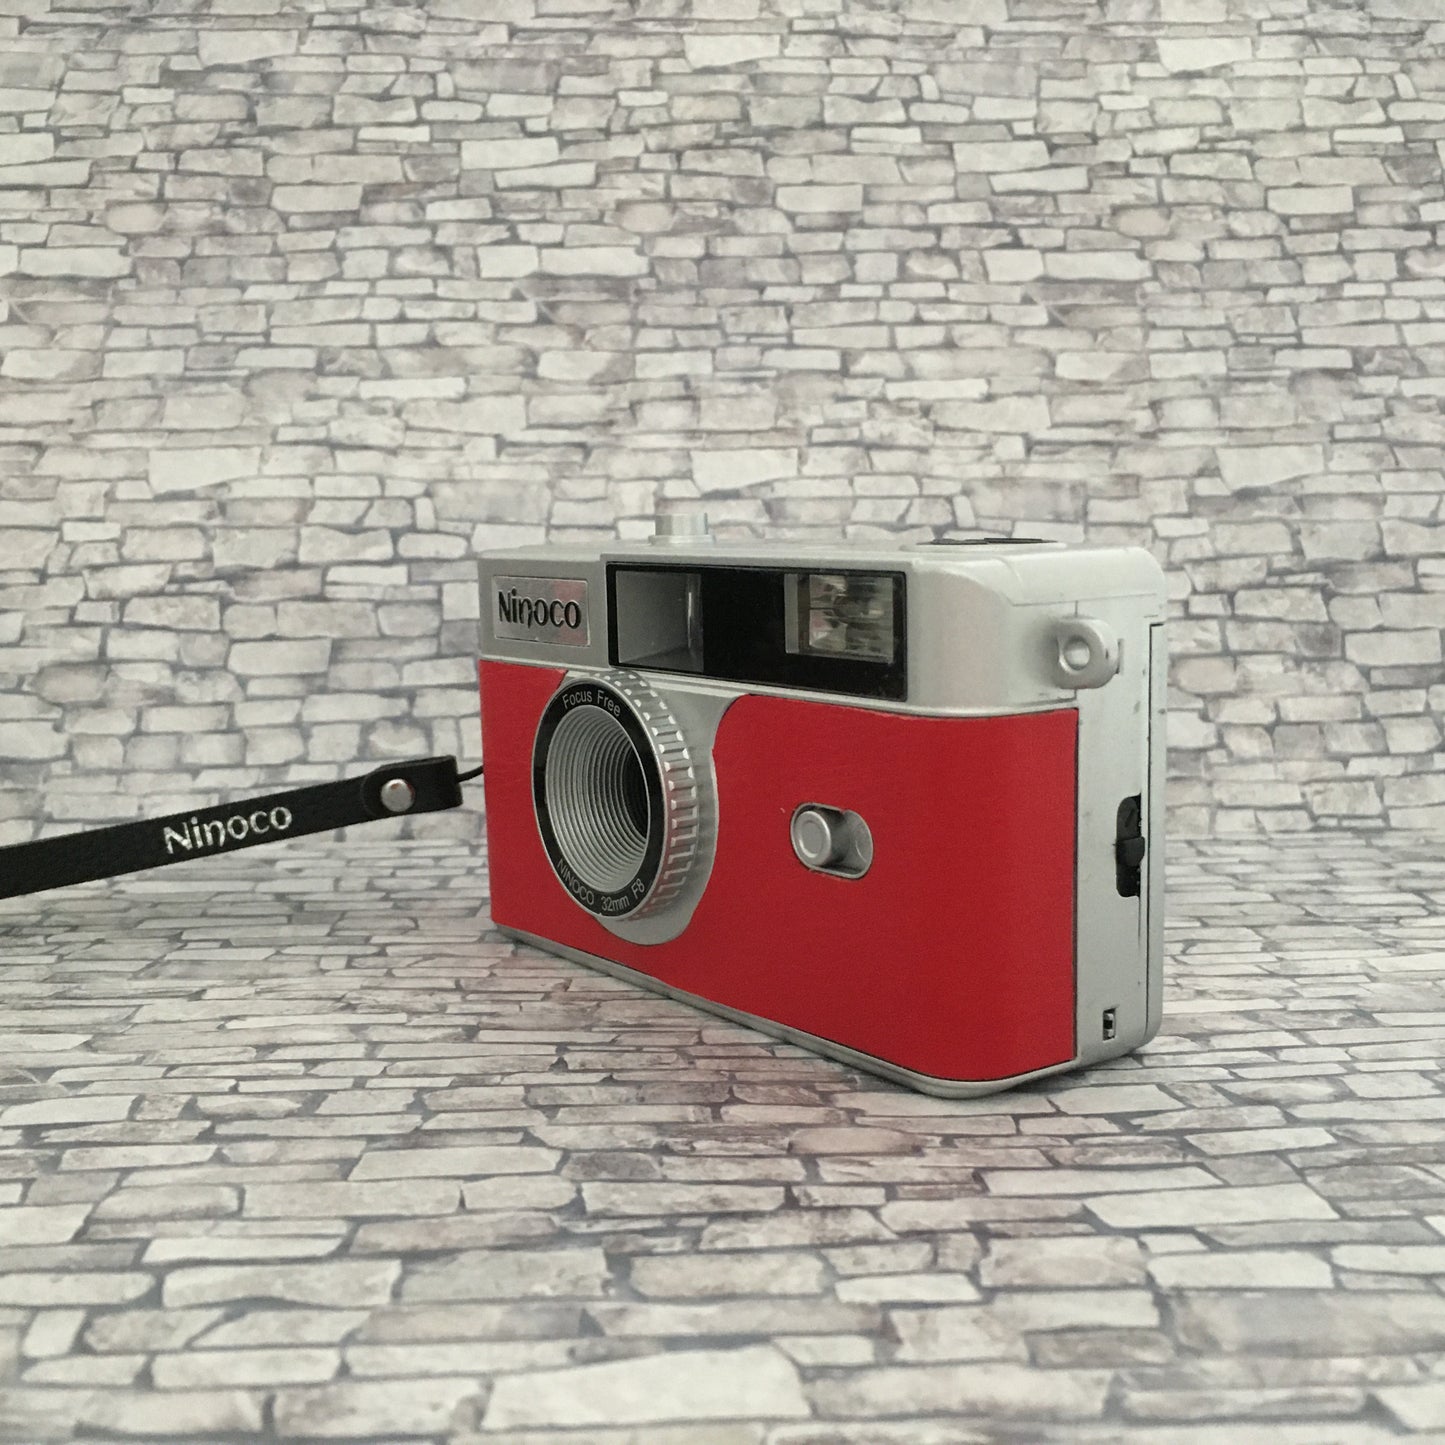 Point & shoot ! Brand new 35mm film camera with vivid red leather